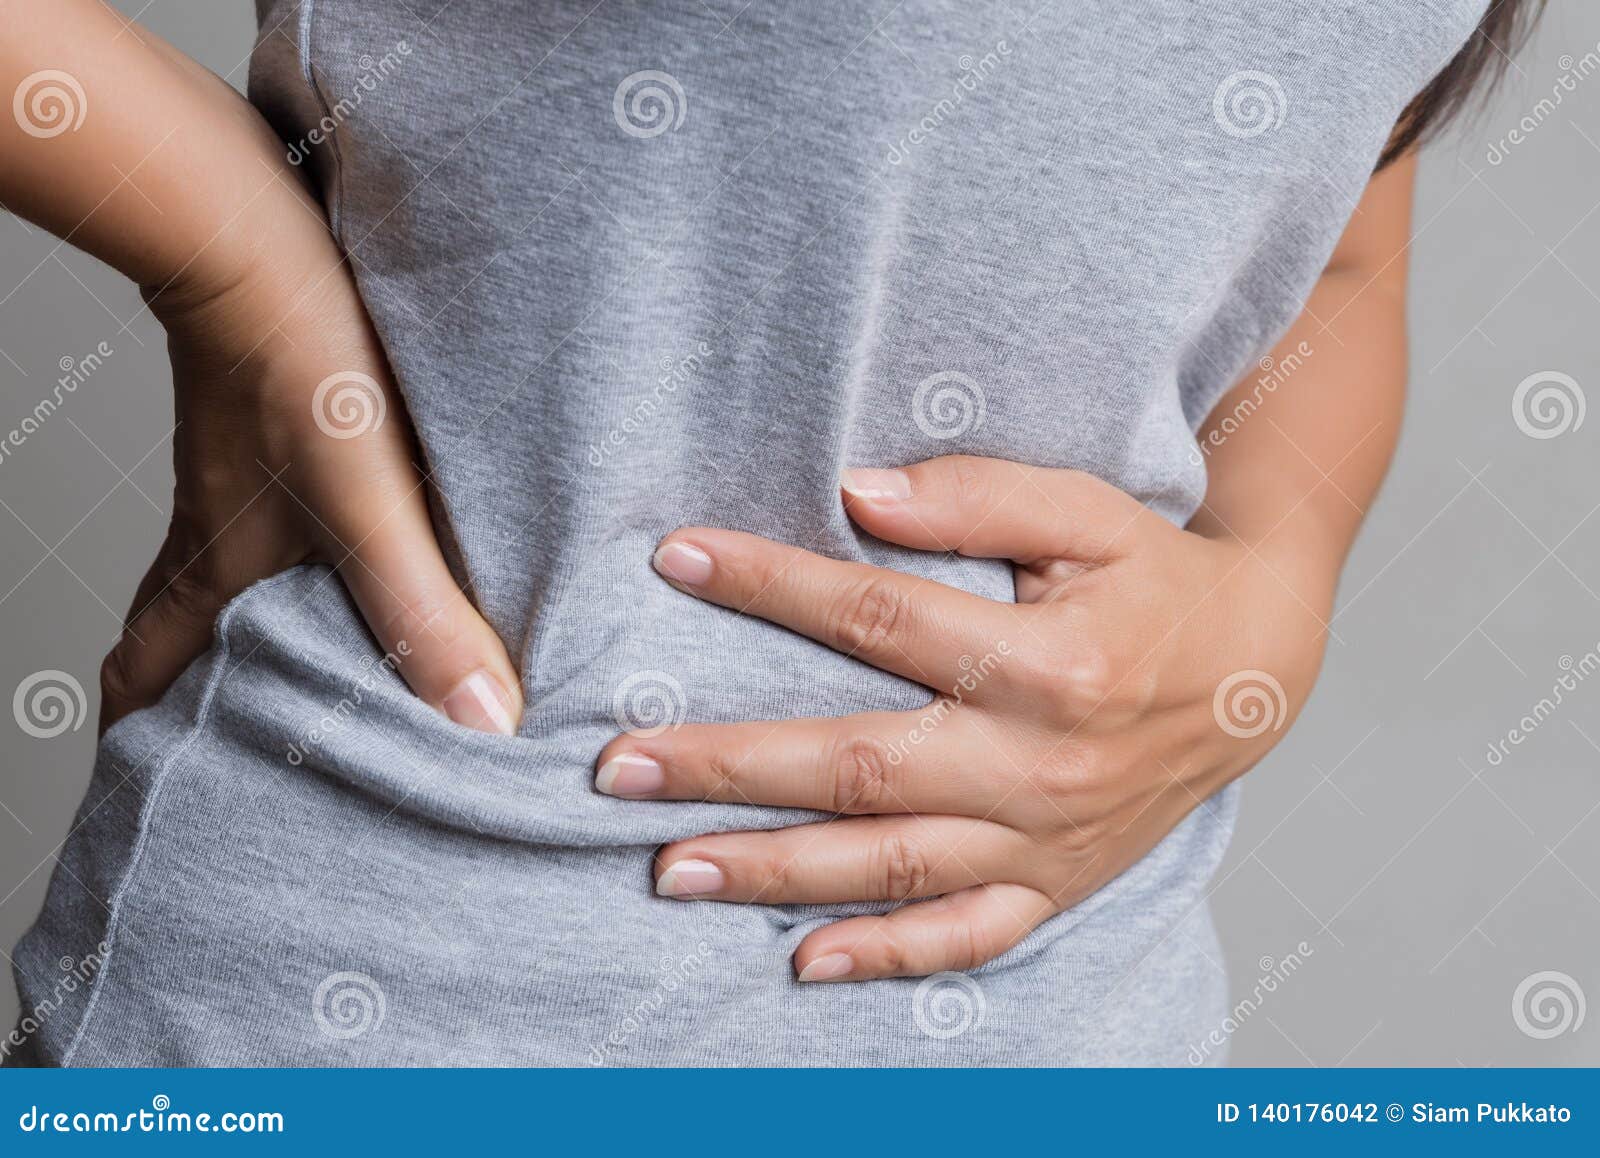 young woman having painful stomachache. chronic gastritis. abdomen bloating and healthcare concept